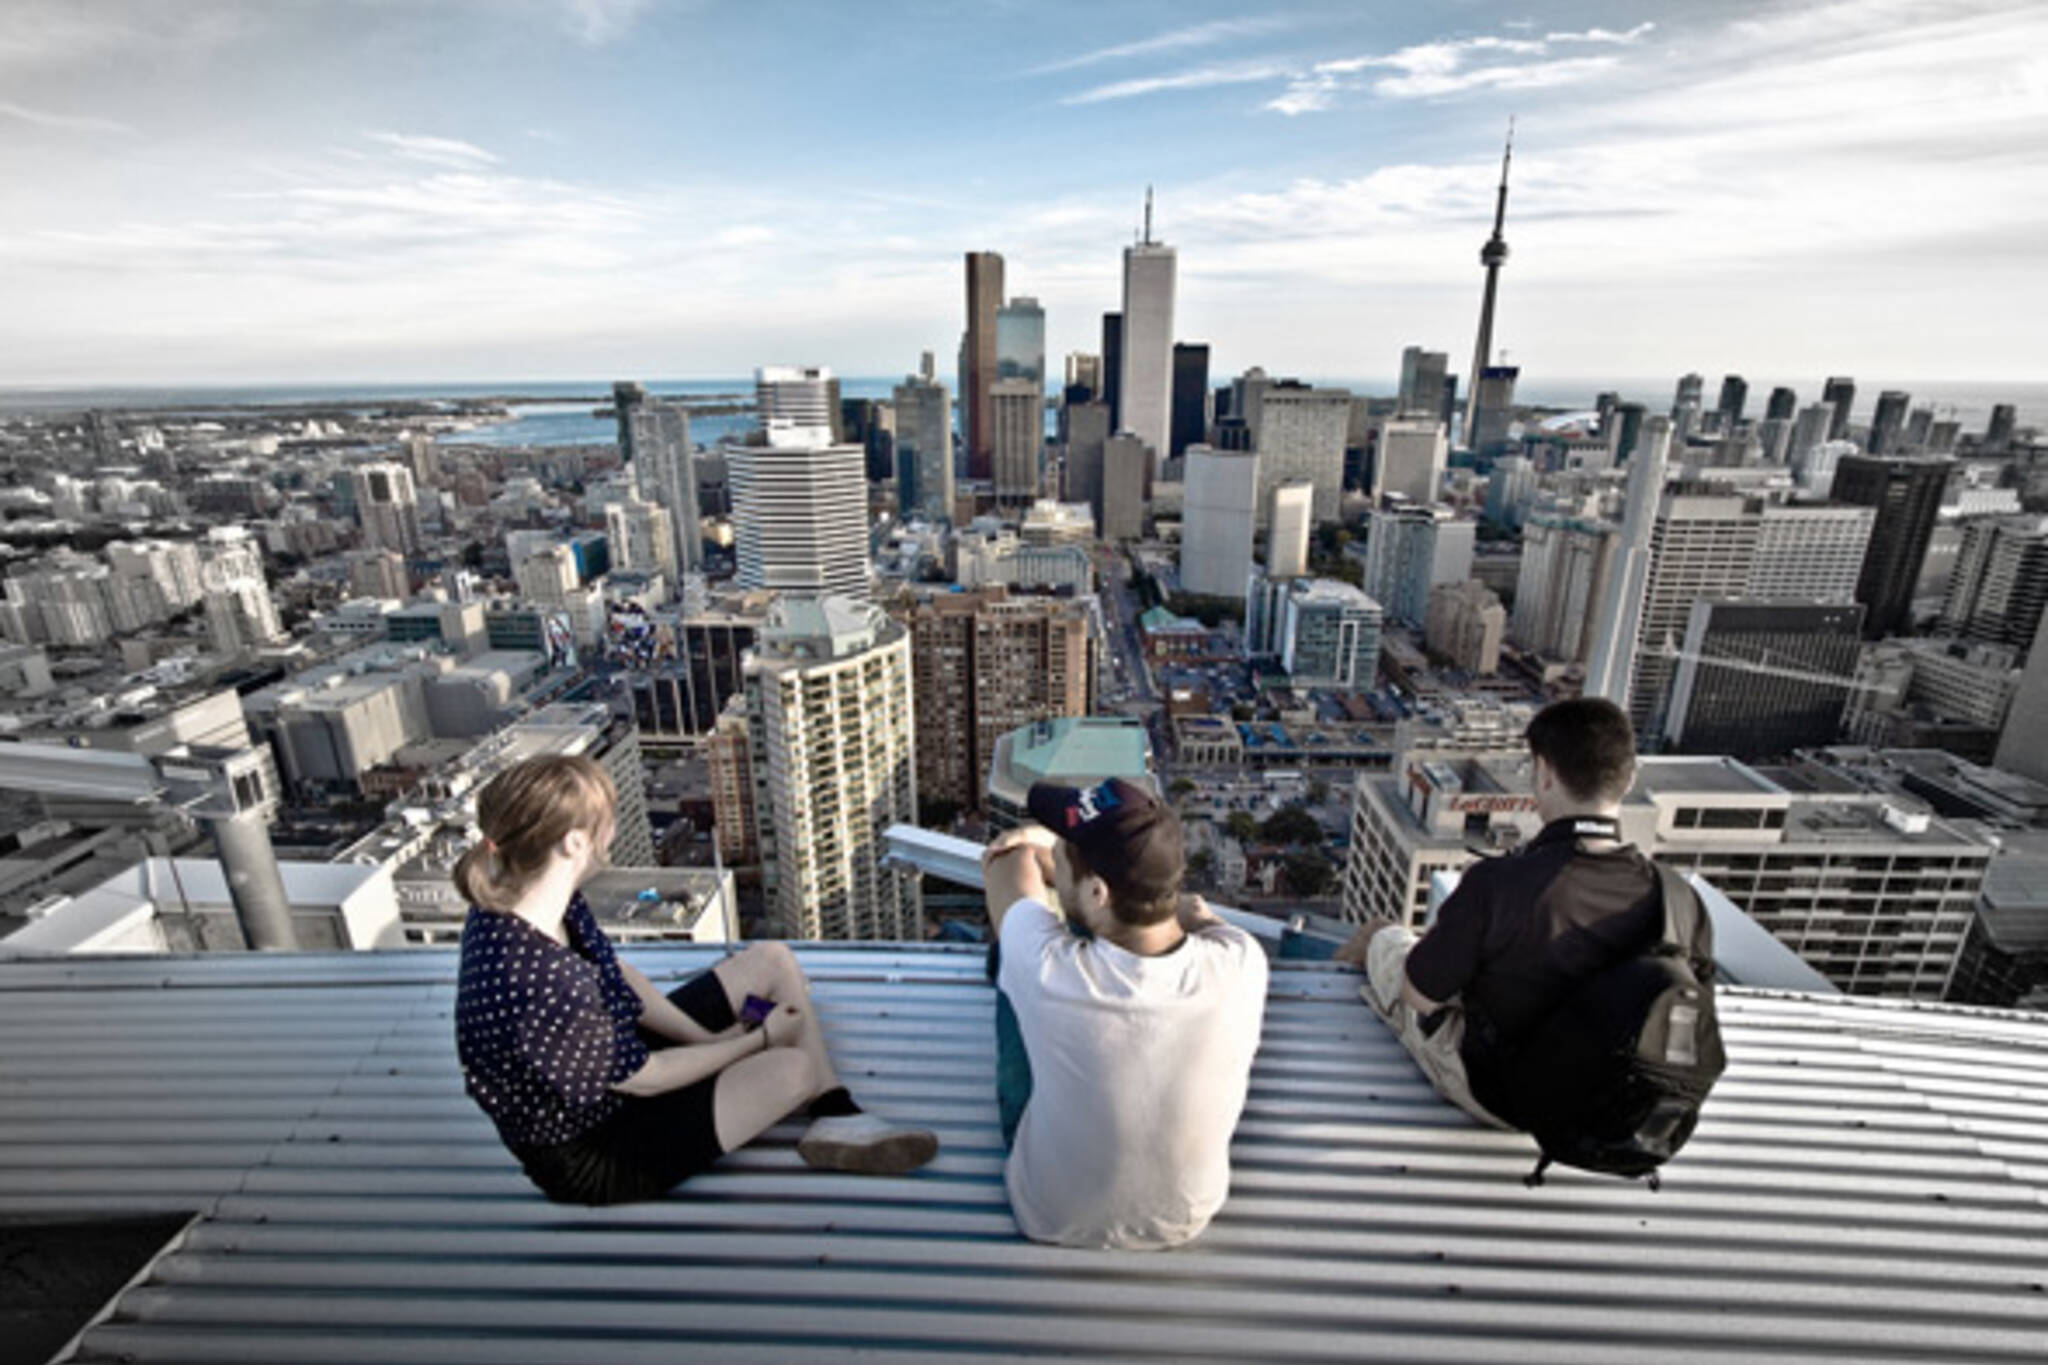 rooftopping Toronto